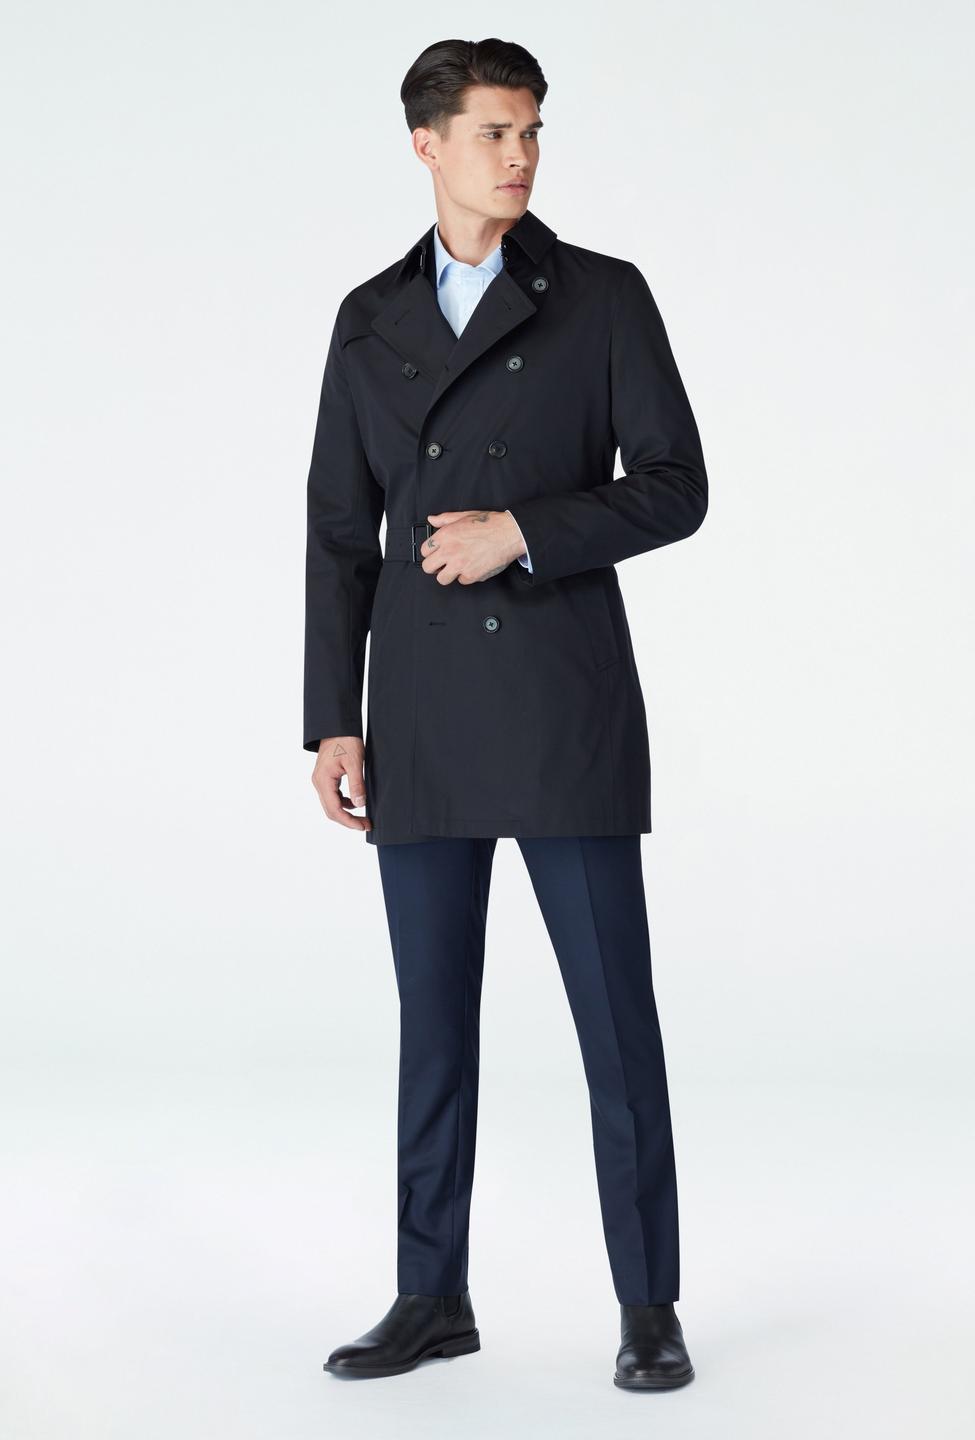 Black trenchcoat - Solid Design from Indochino Collection